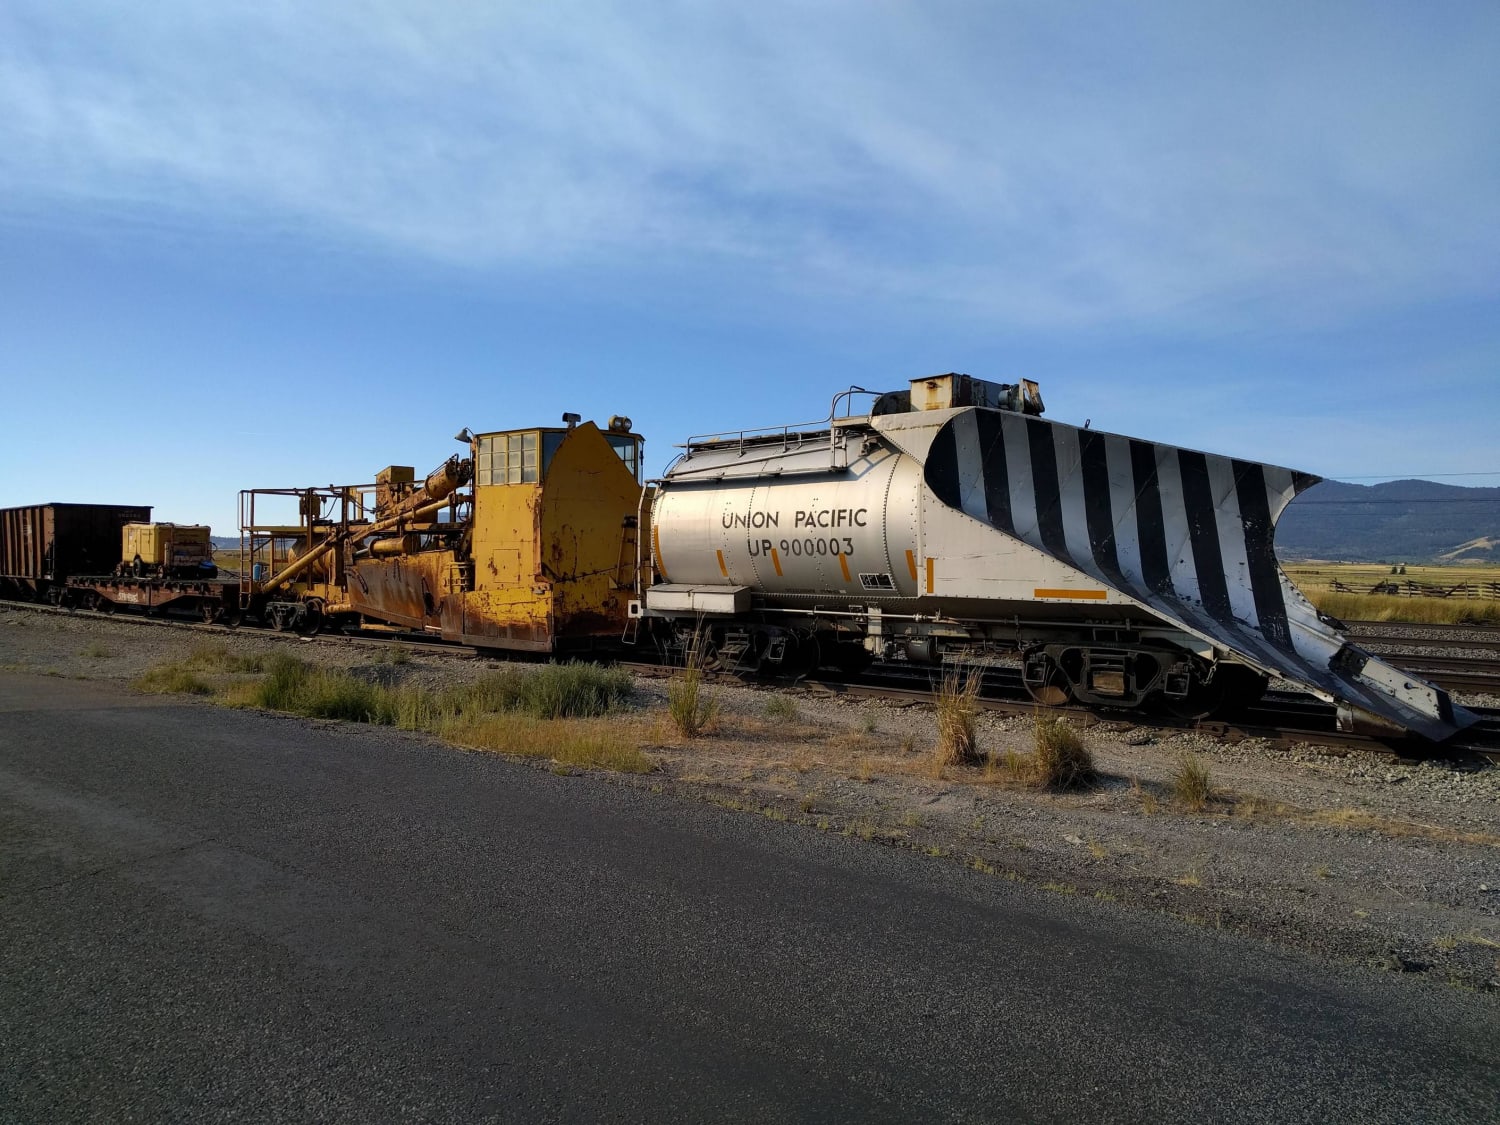 Another snow-clearing train in southern Idaho